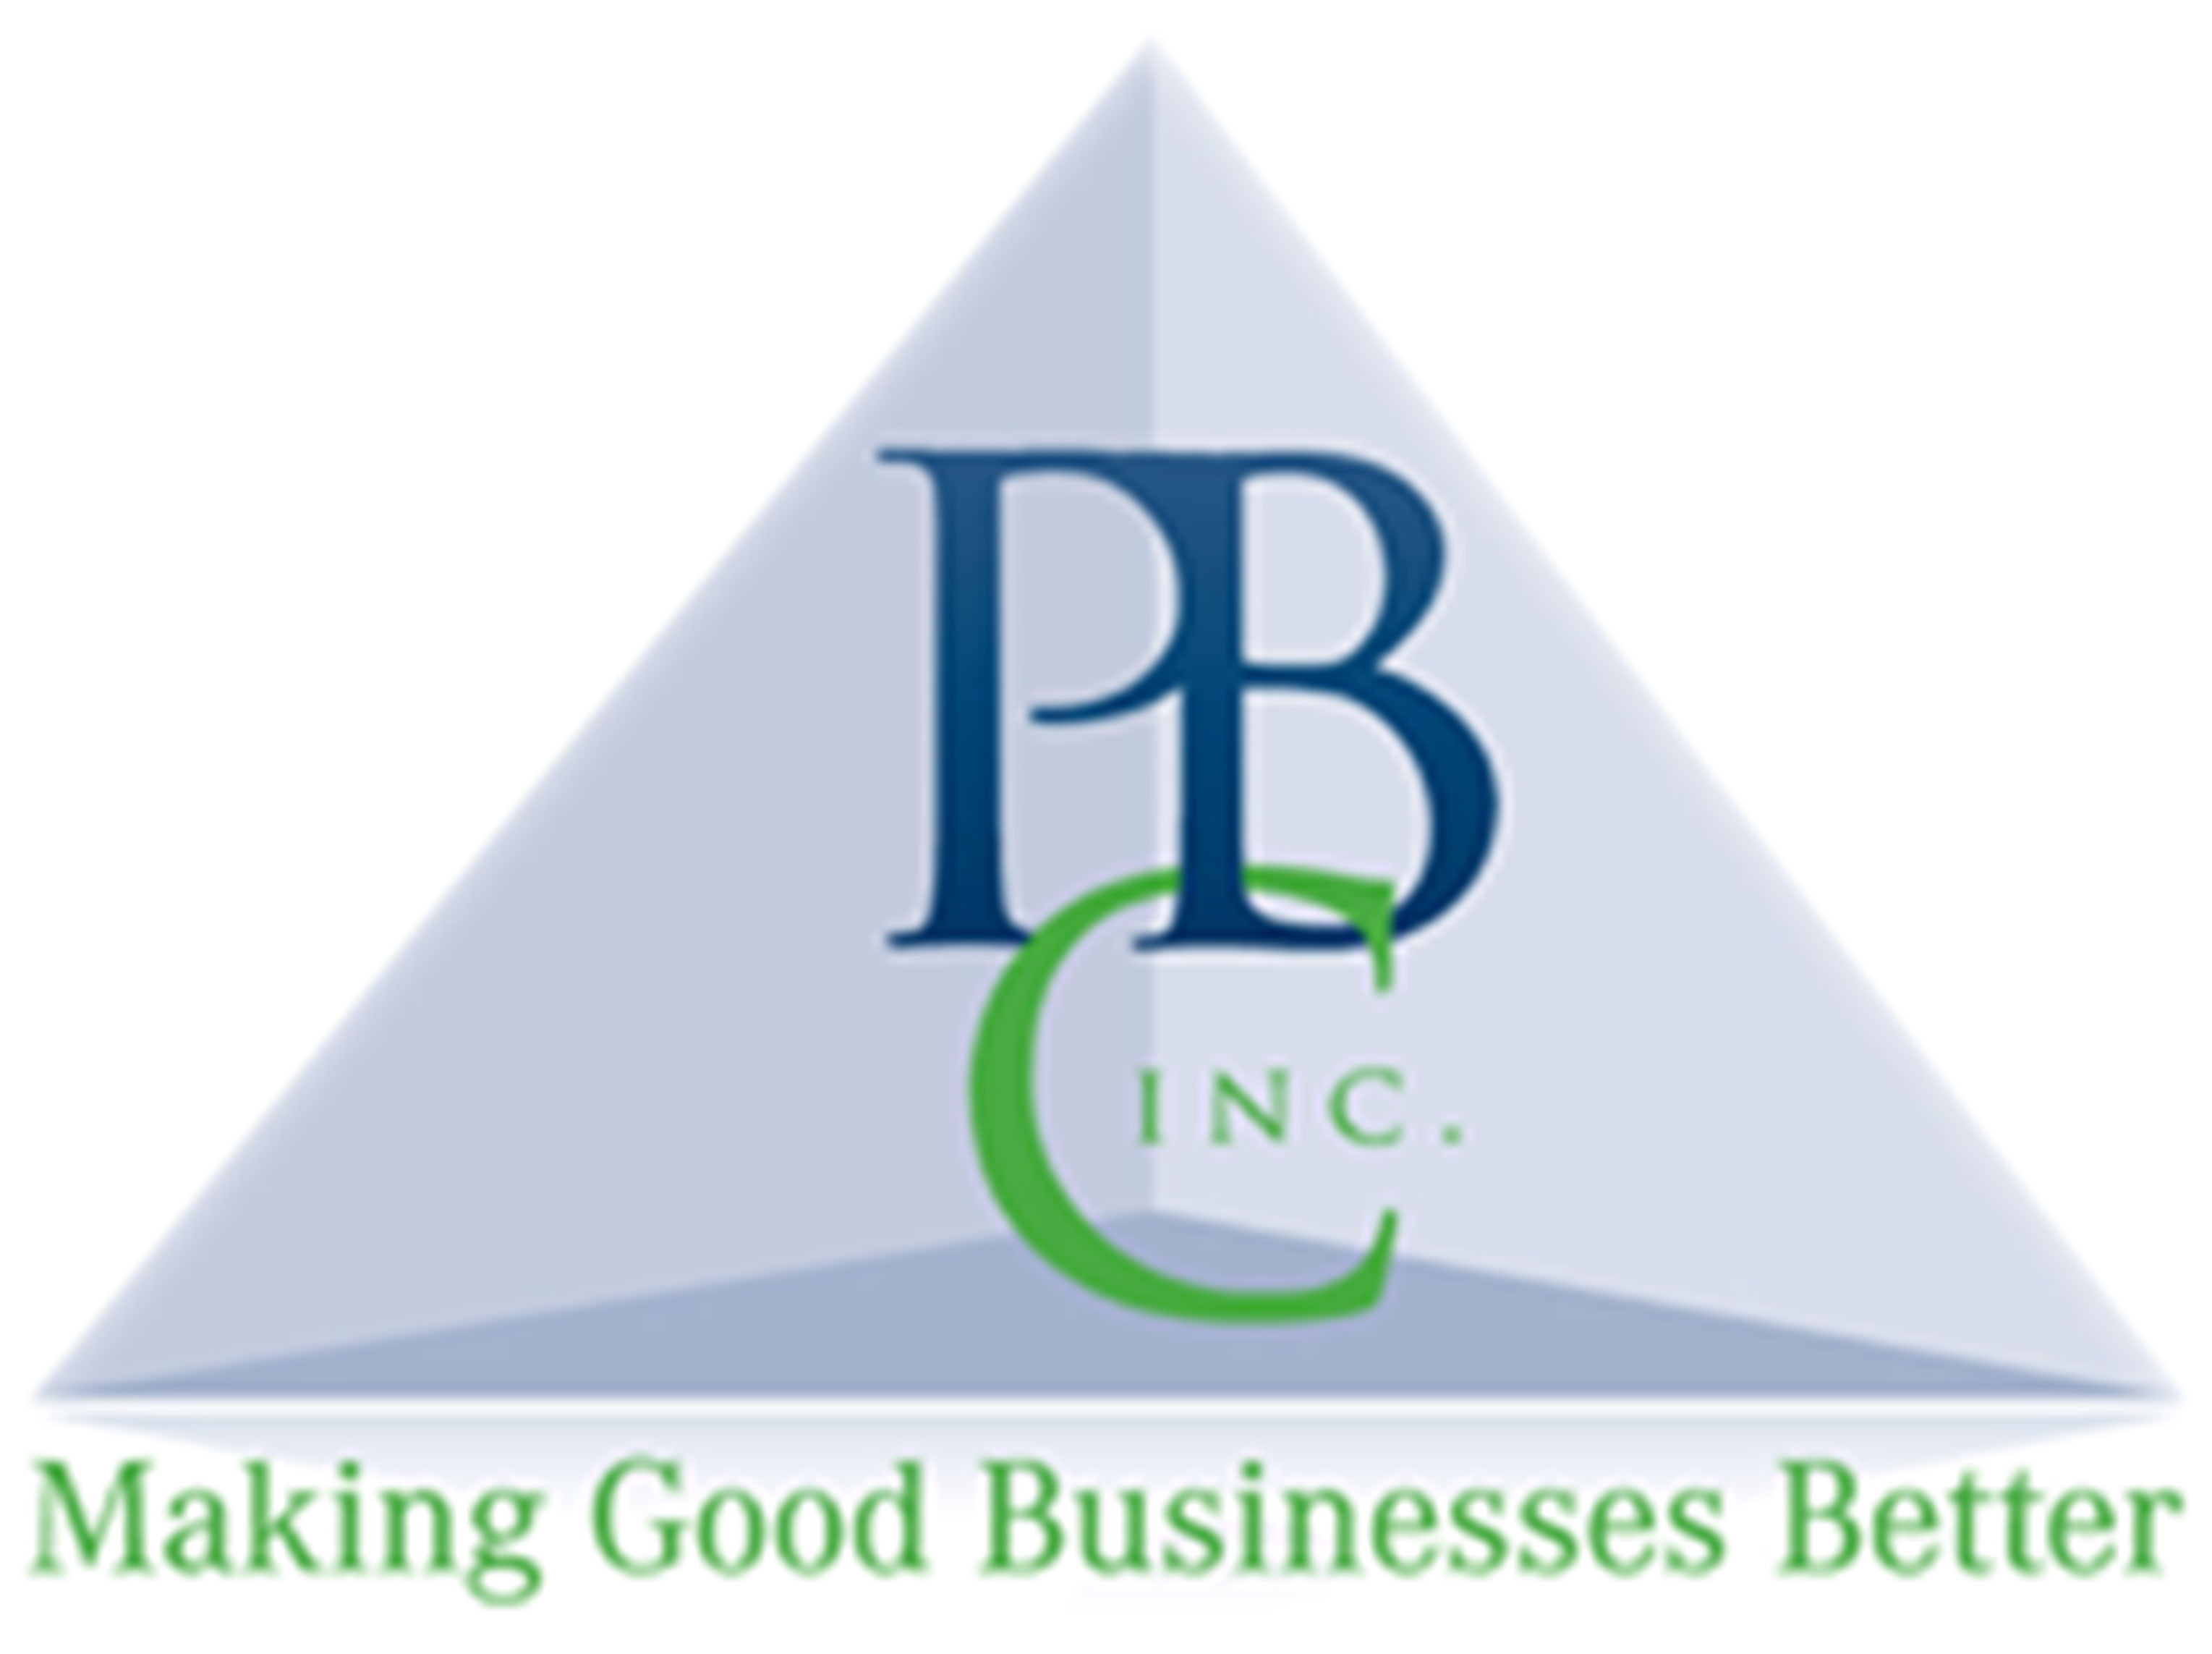 Professional Business Coaches, Inc.  - Making Good Businesses Better